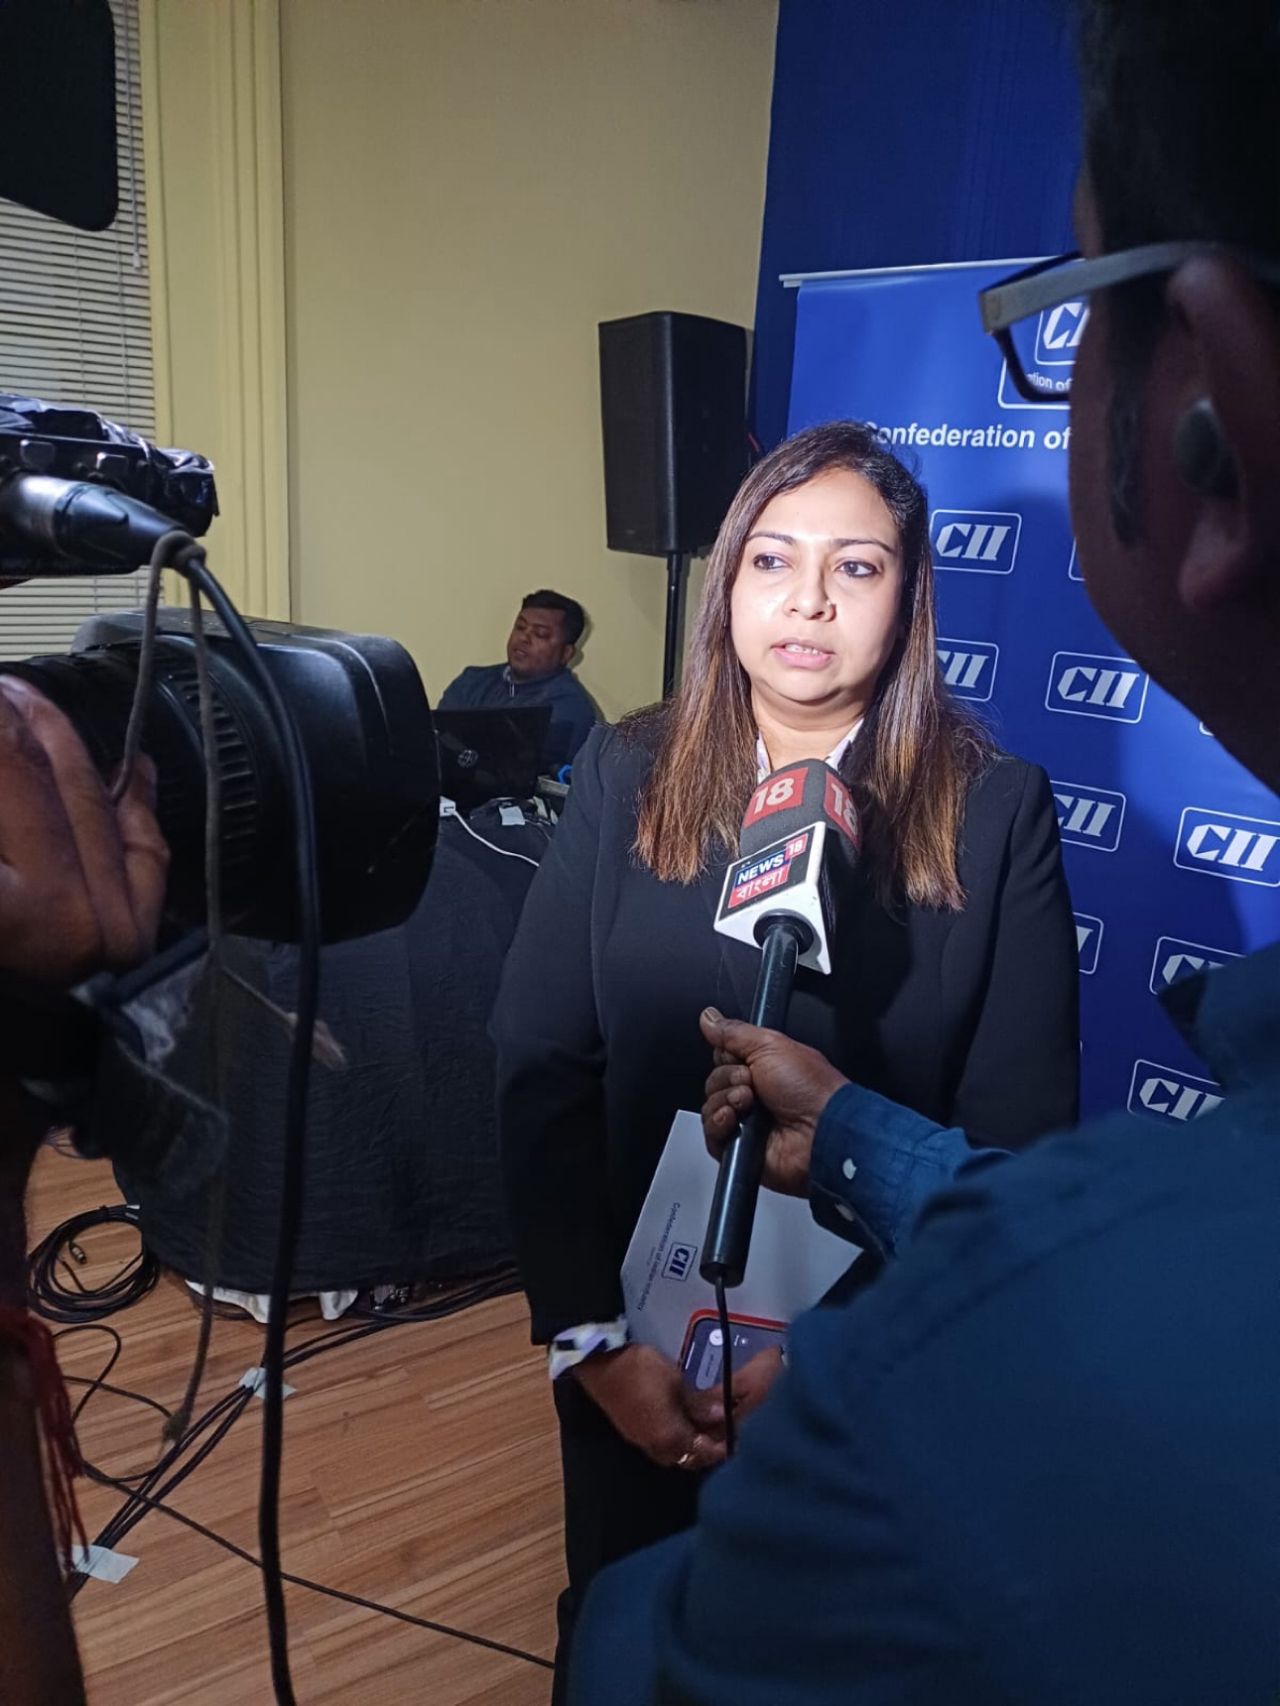 Our Managing Partner & Chairperson CII West Bengal State Council - Sucharita Basu at the Live Budget Viewing Session & media interaction at the Confederation of Indian Industry Kolkata Office.